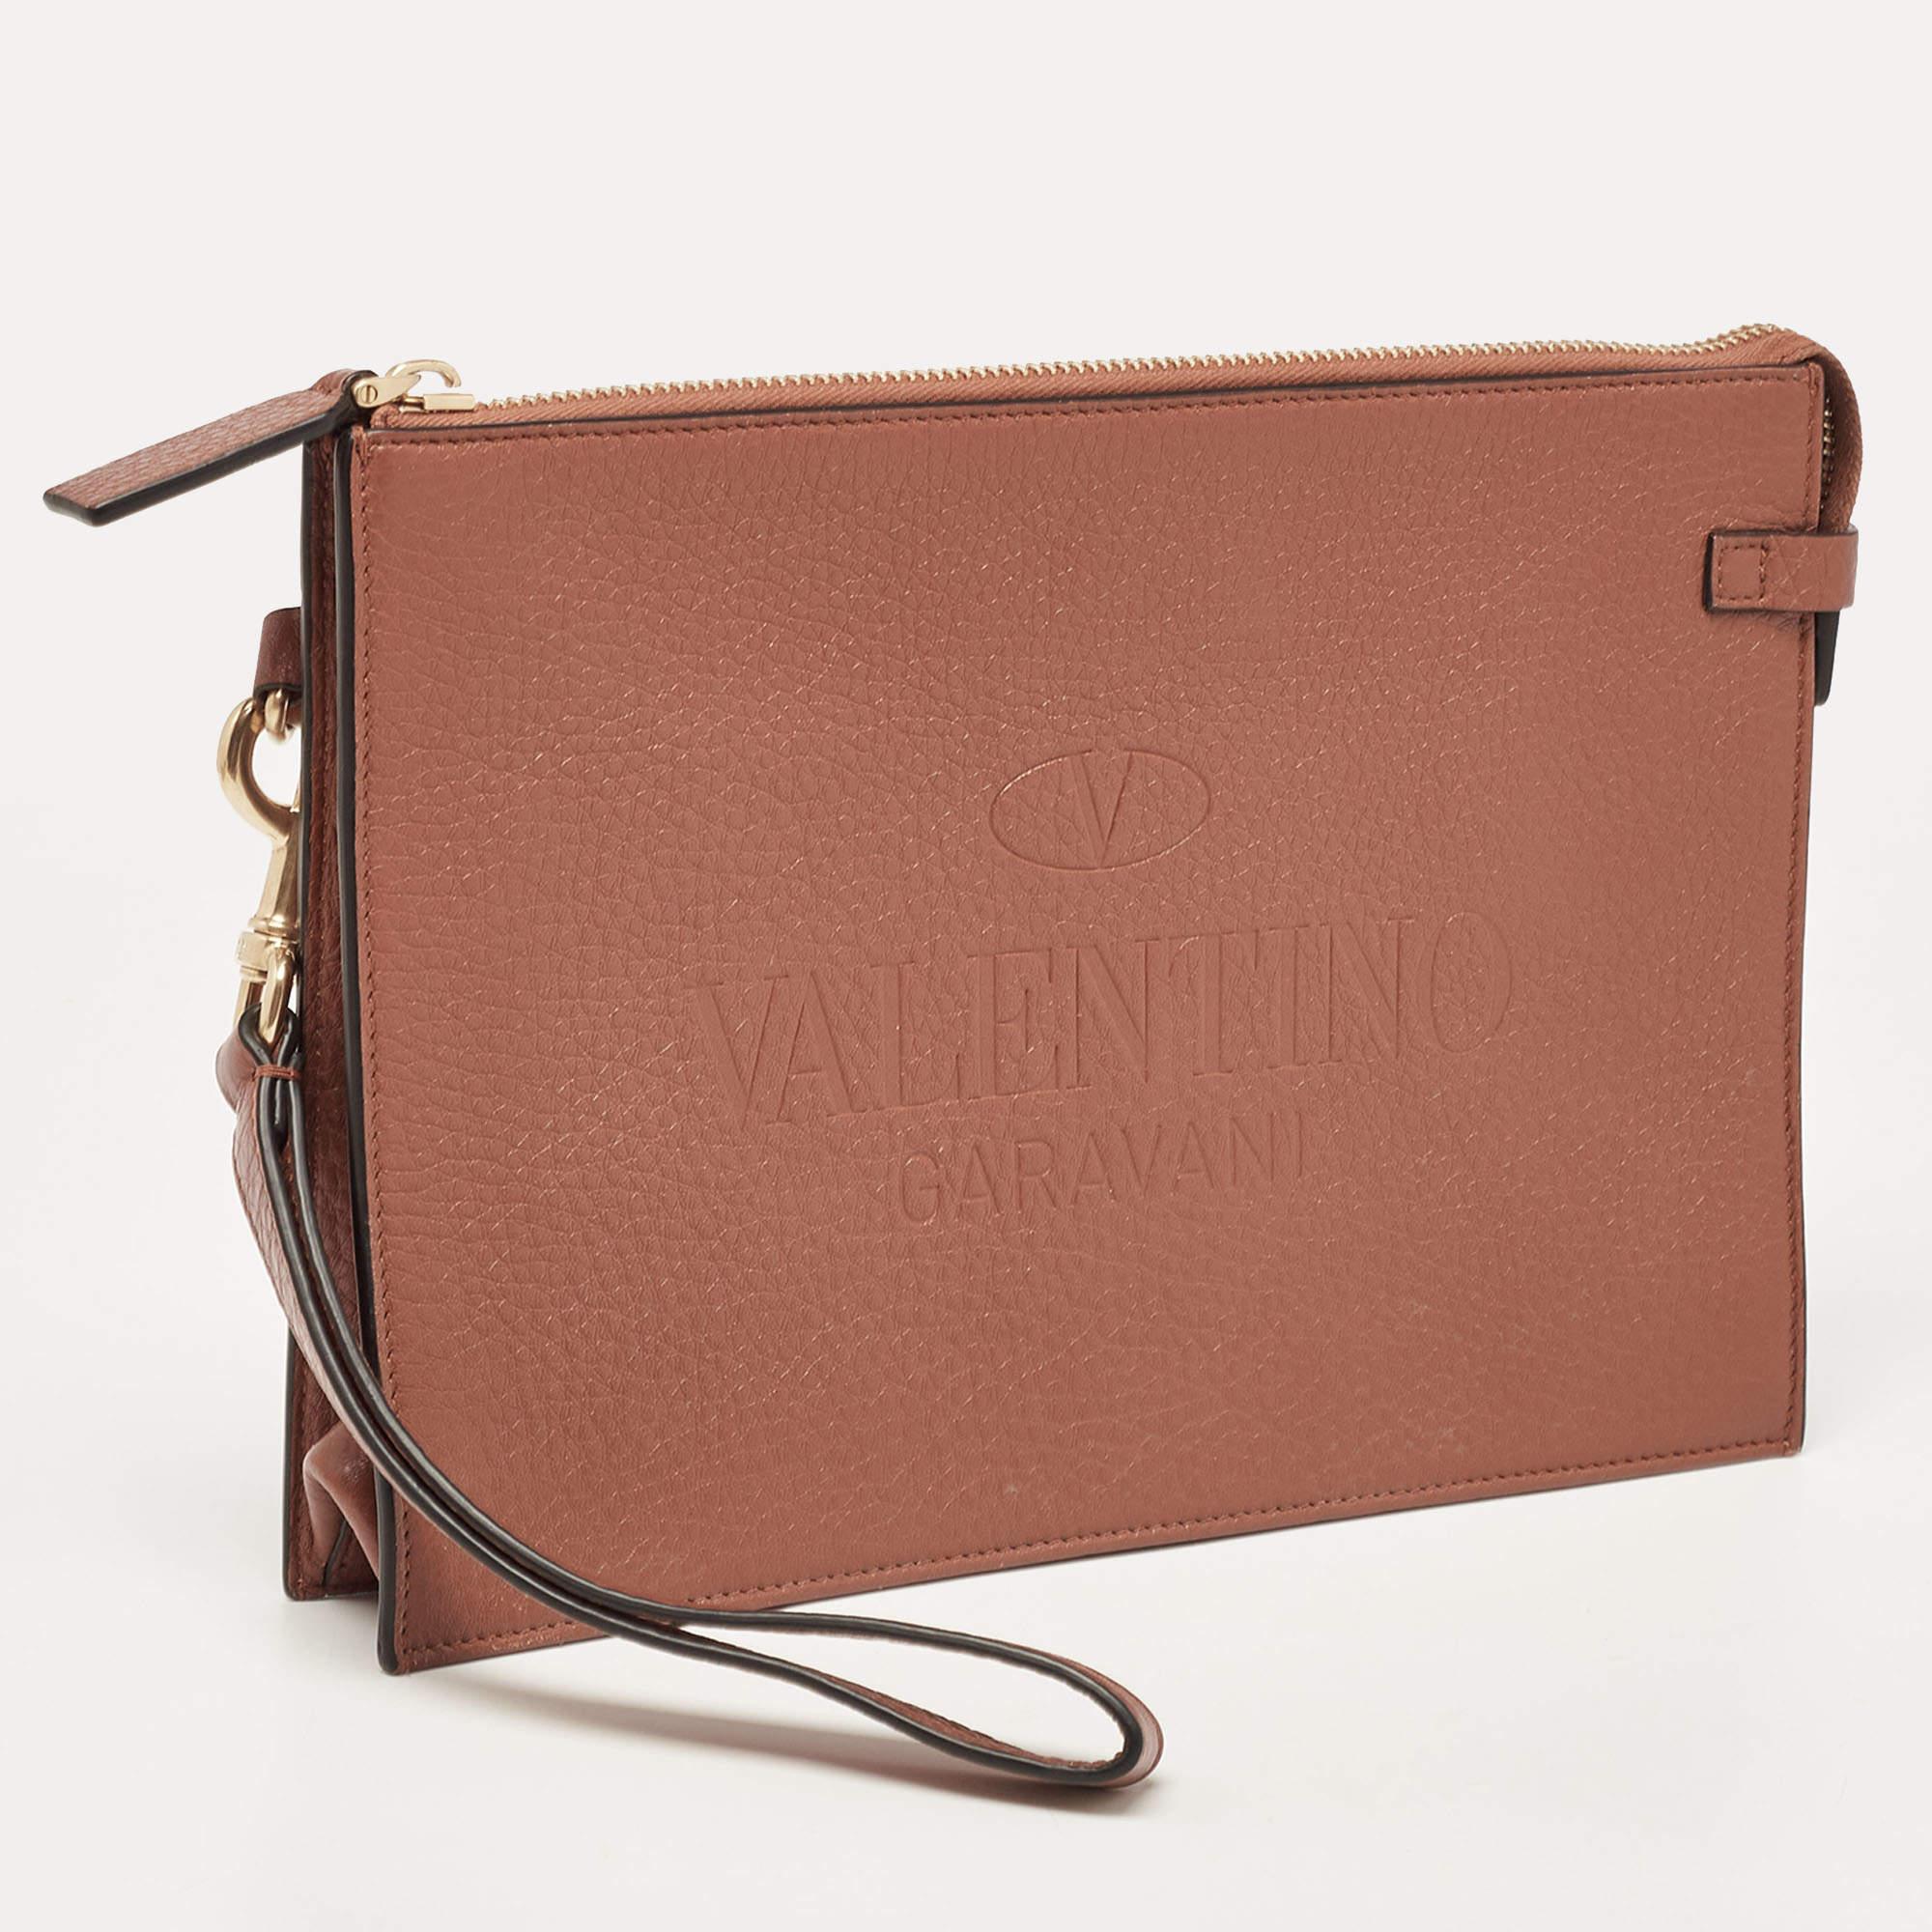 Valentino Brown Leather Logo Embossed Wristlet Clutch 3